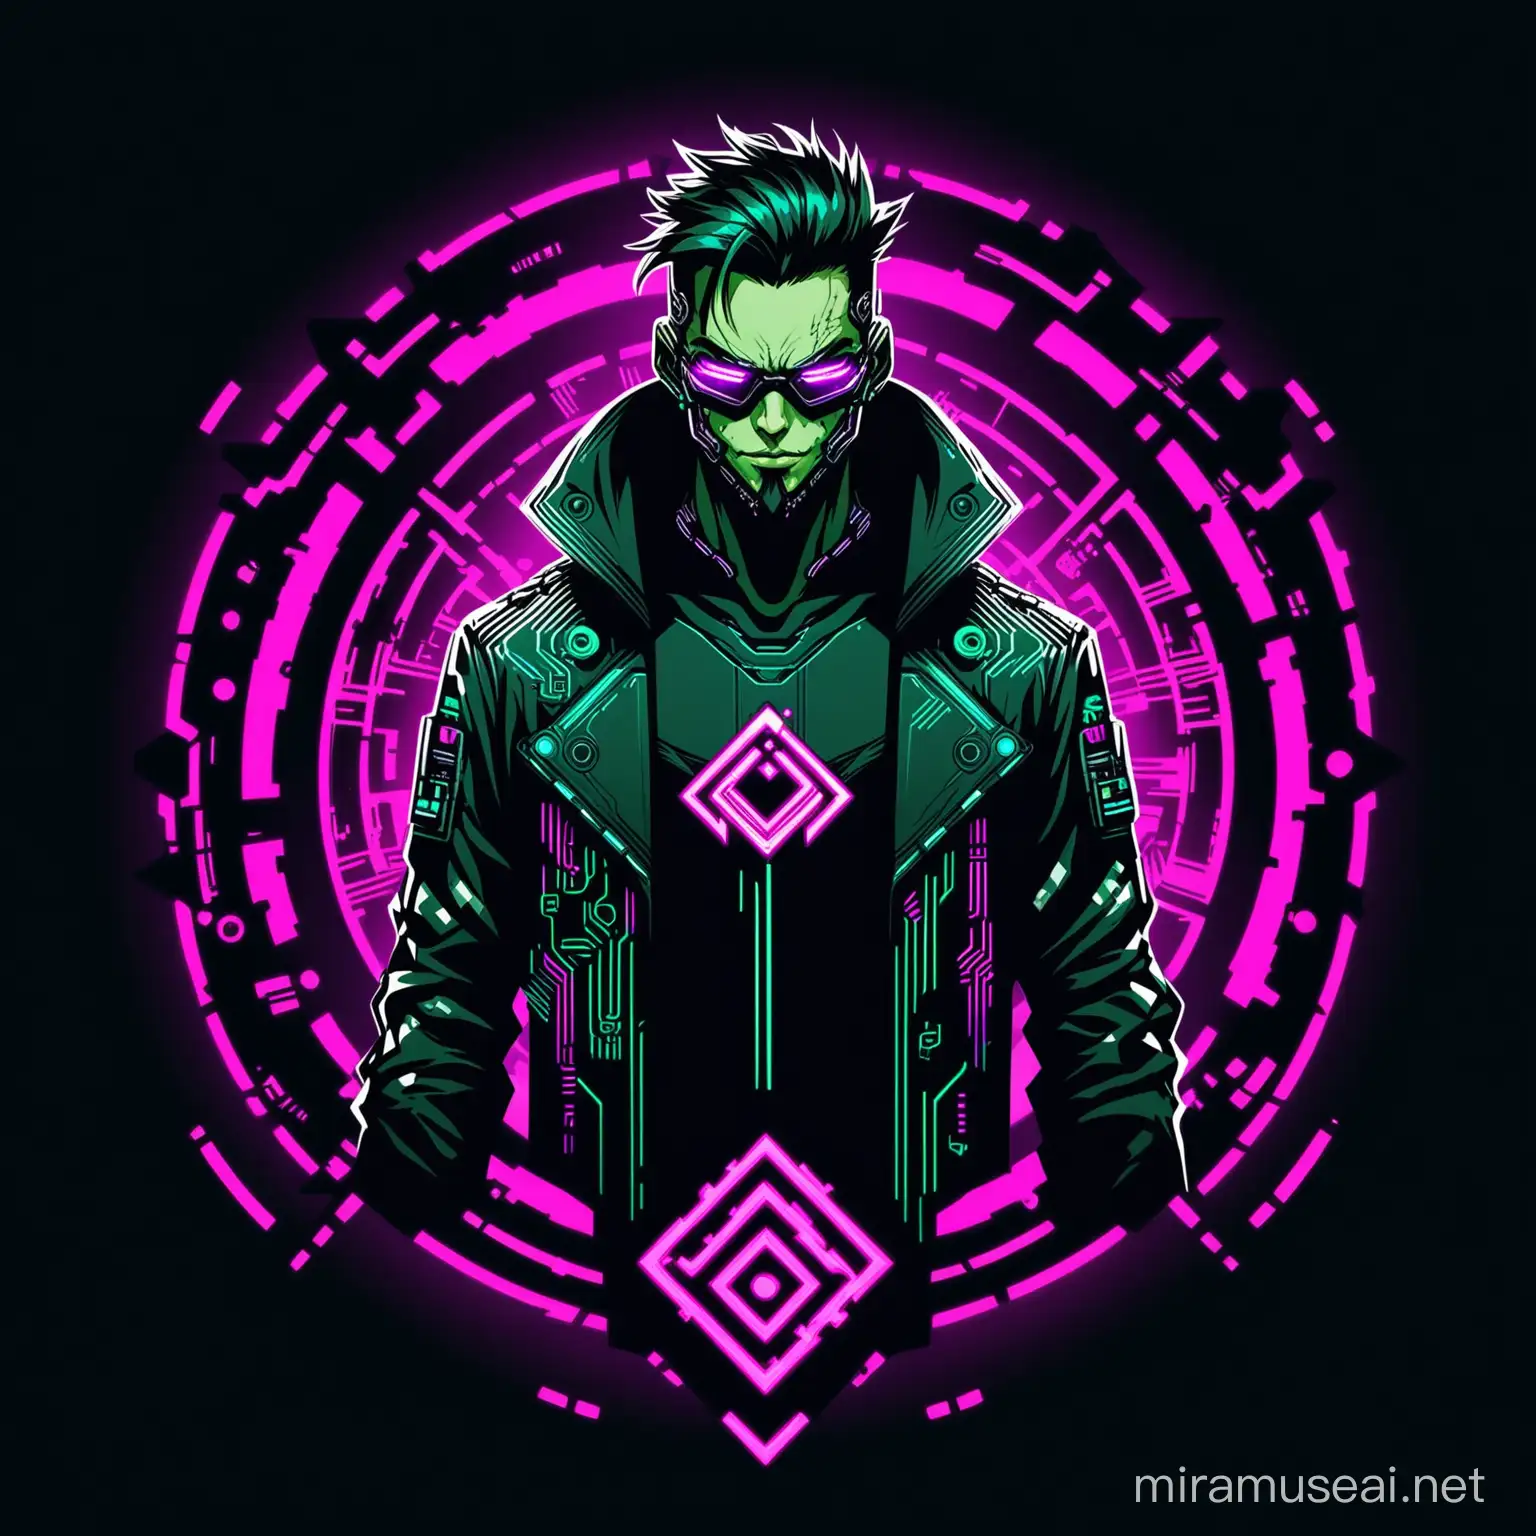 Sinister Cyberpunk Figure with Prominent Logo